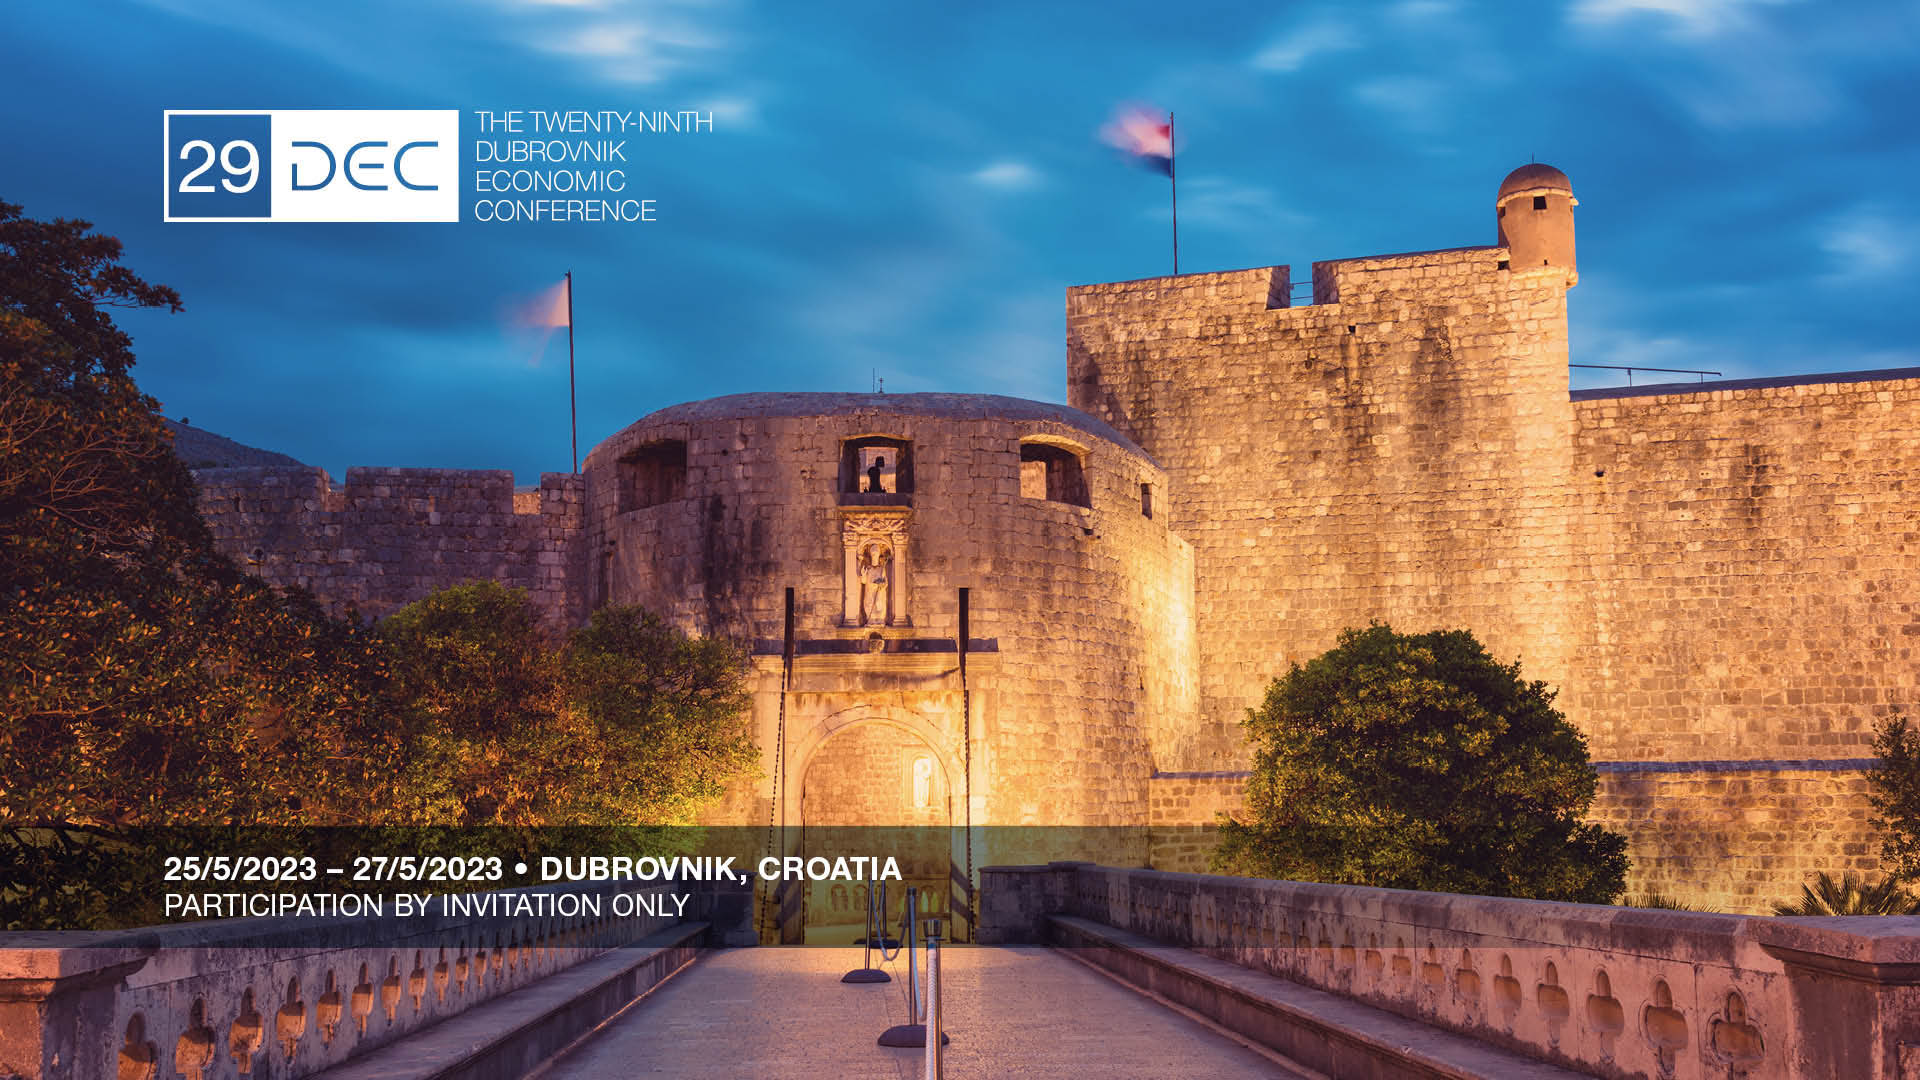 The 29th Dubrovnik Economic Conference